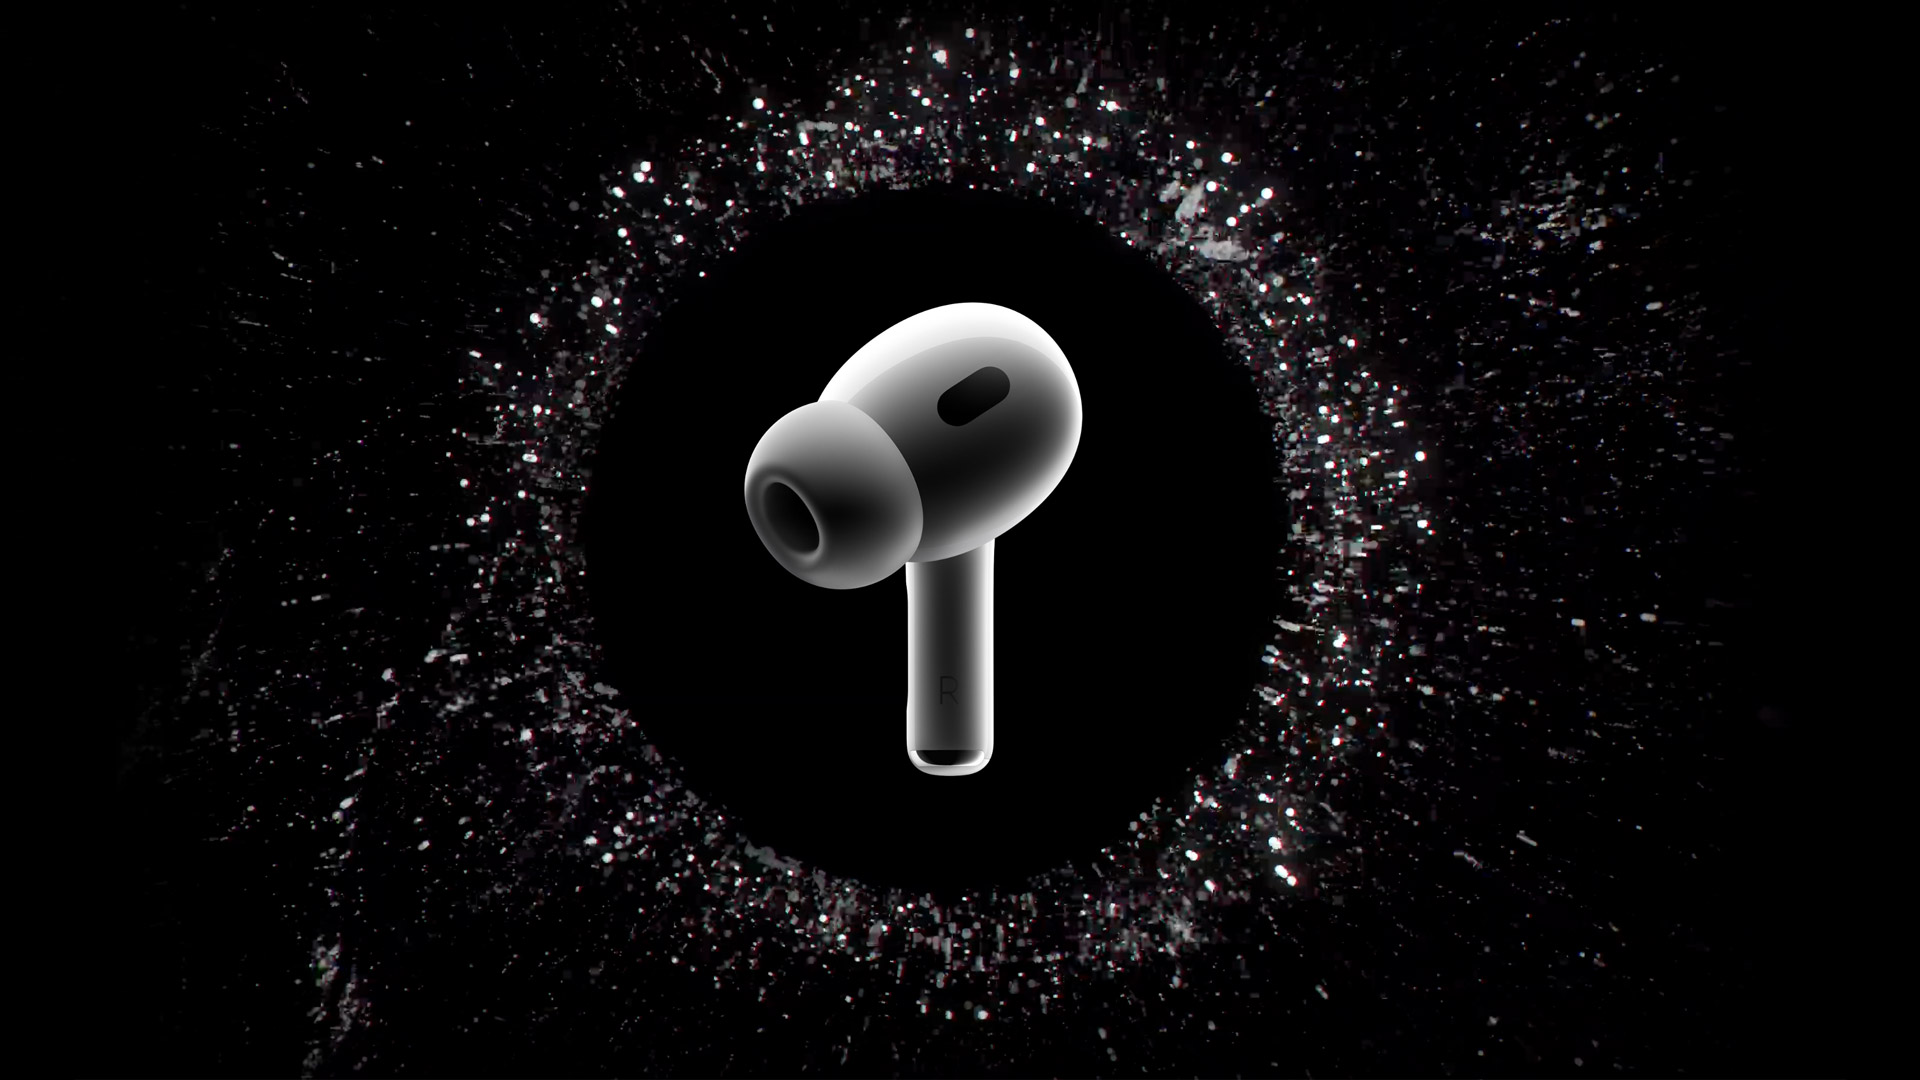 AirPods Pro With USB-C: Price, Release Date, New Features